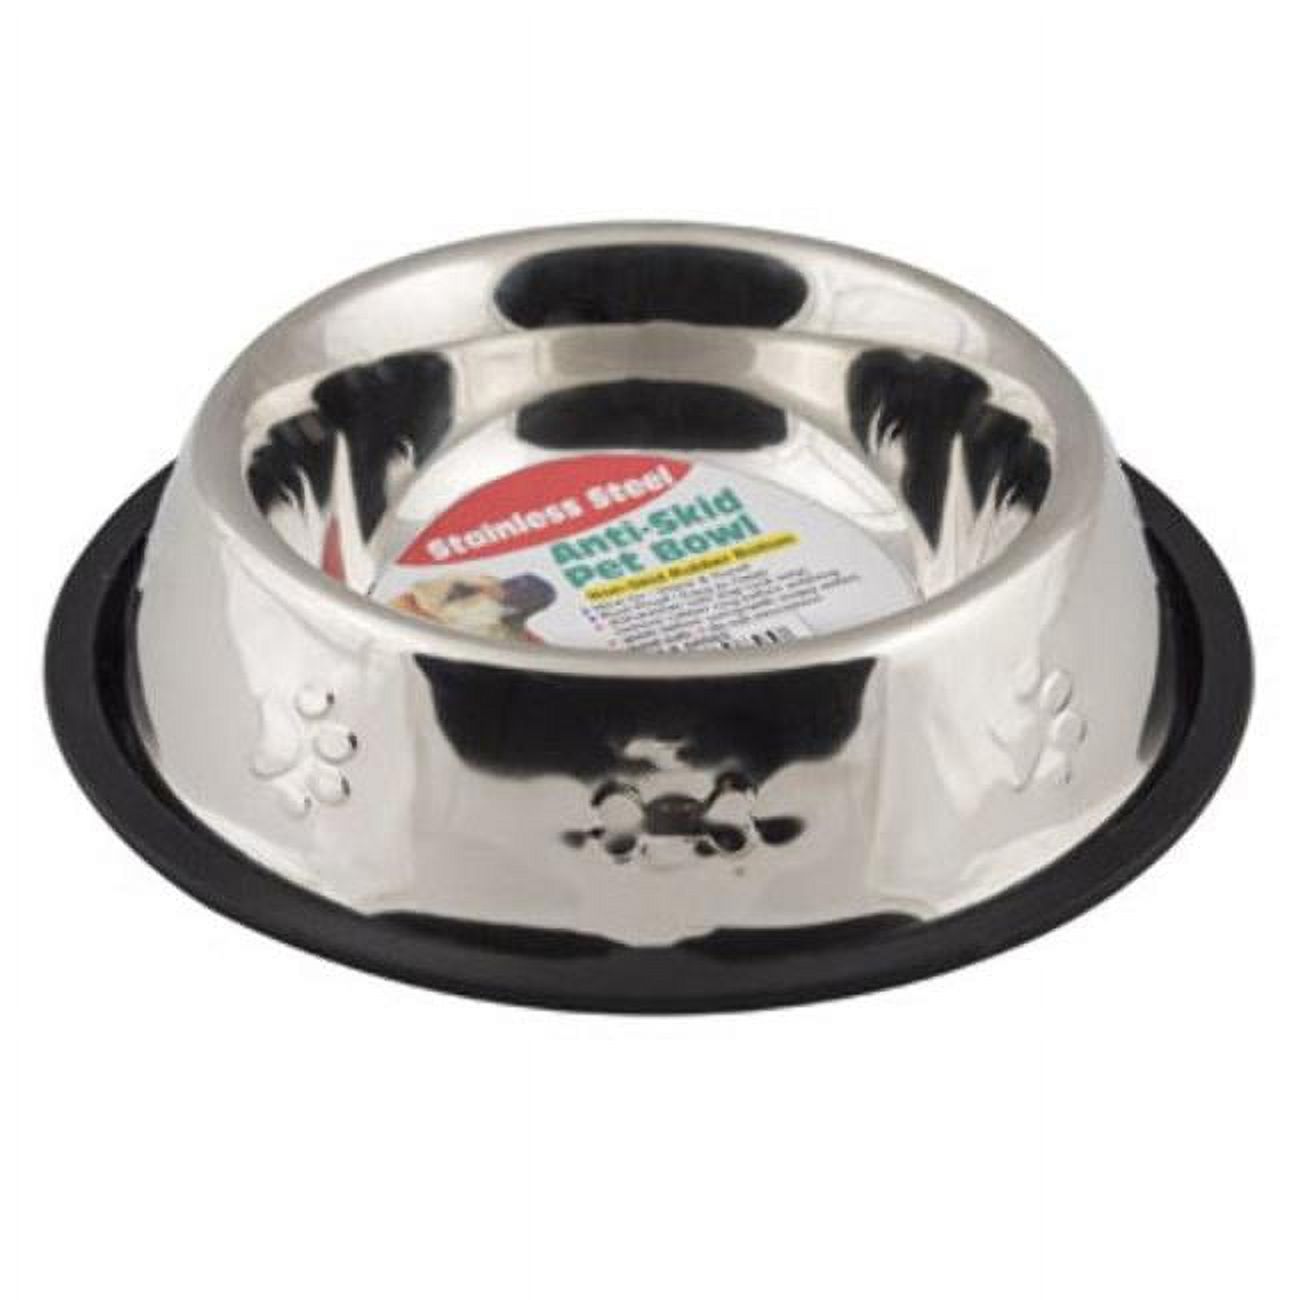 2324881 32 Oz Stainless Steel Pet Bowl, Silver - Case Of 24 - 24 Per Pack